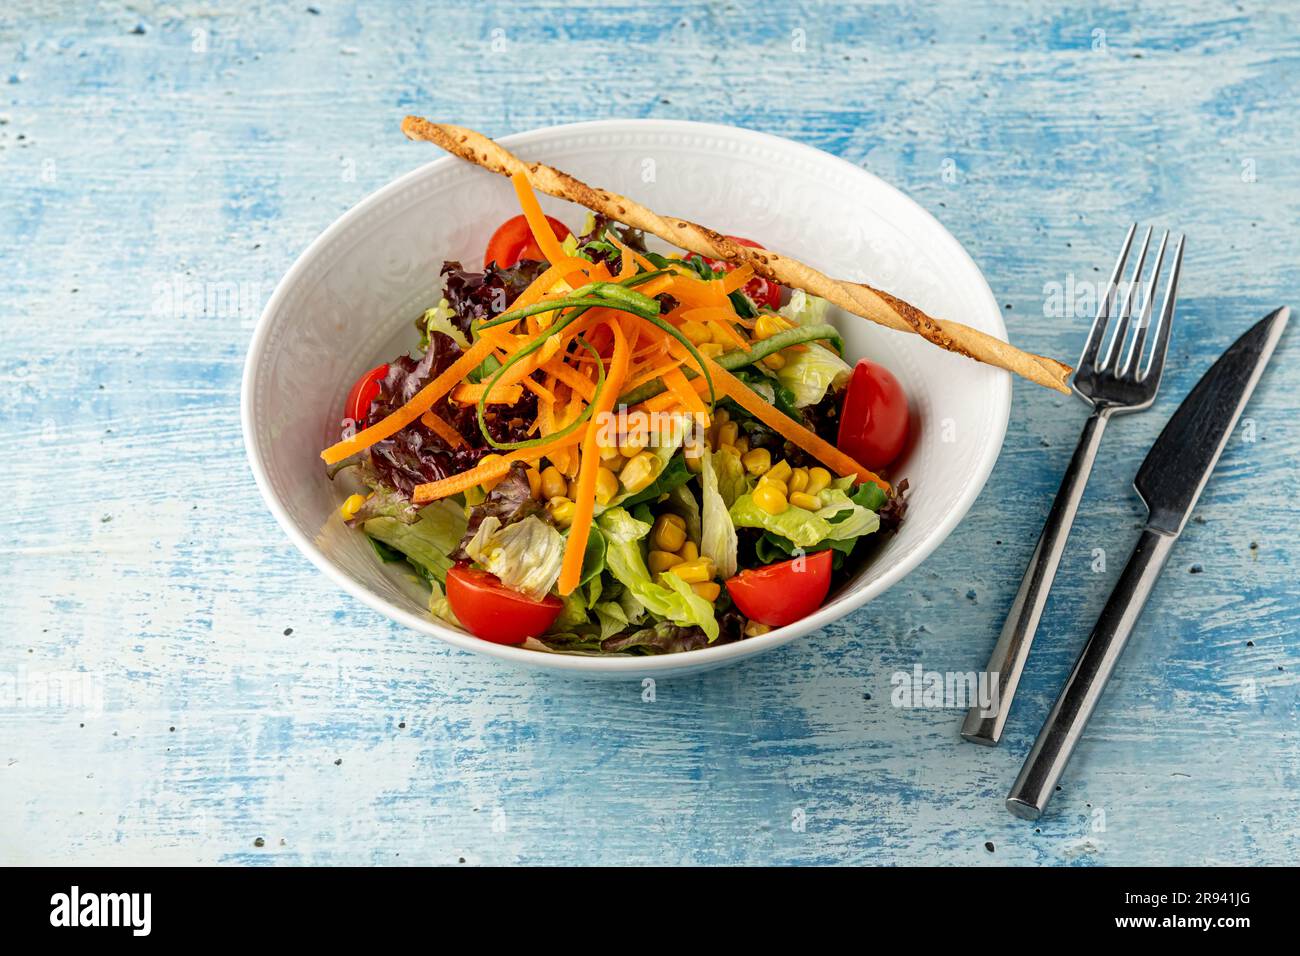 Healthy mixed salad in white bowl on wooden table. Mediterranean salad Stock Photo